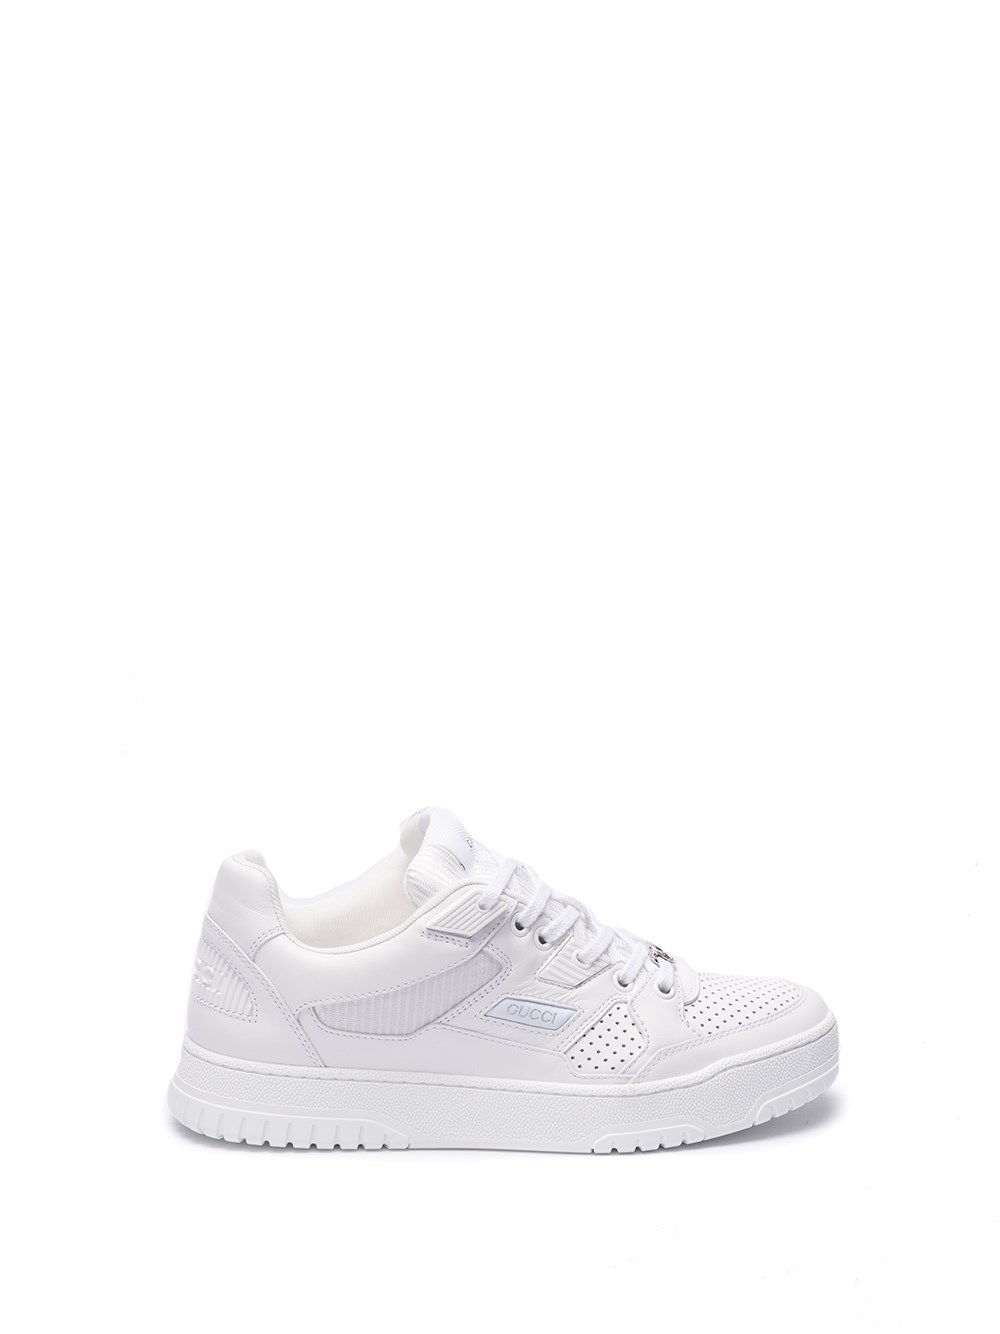 Gucci Jones Leather Trainers In White